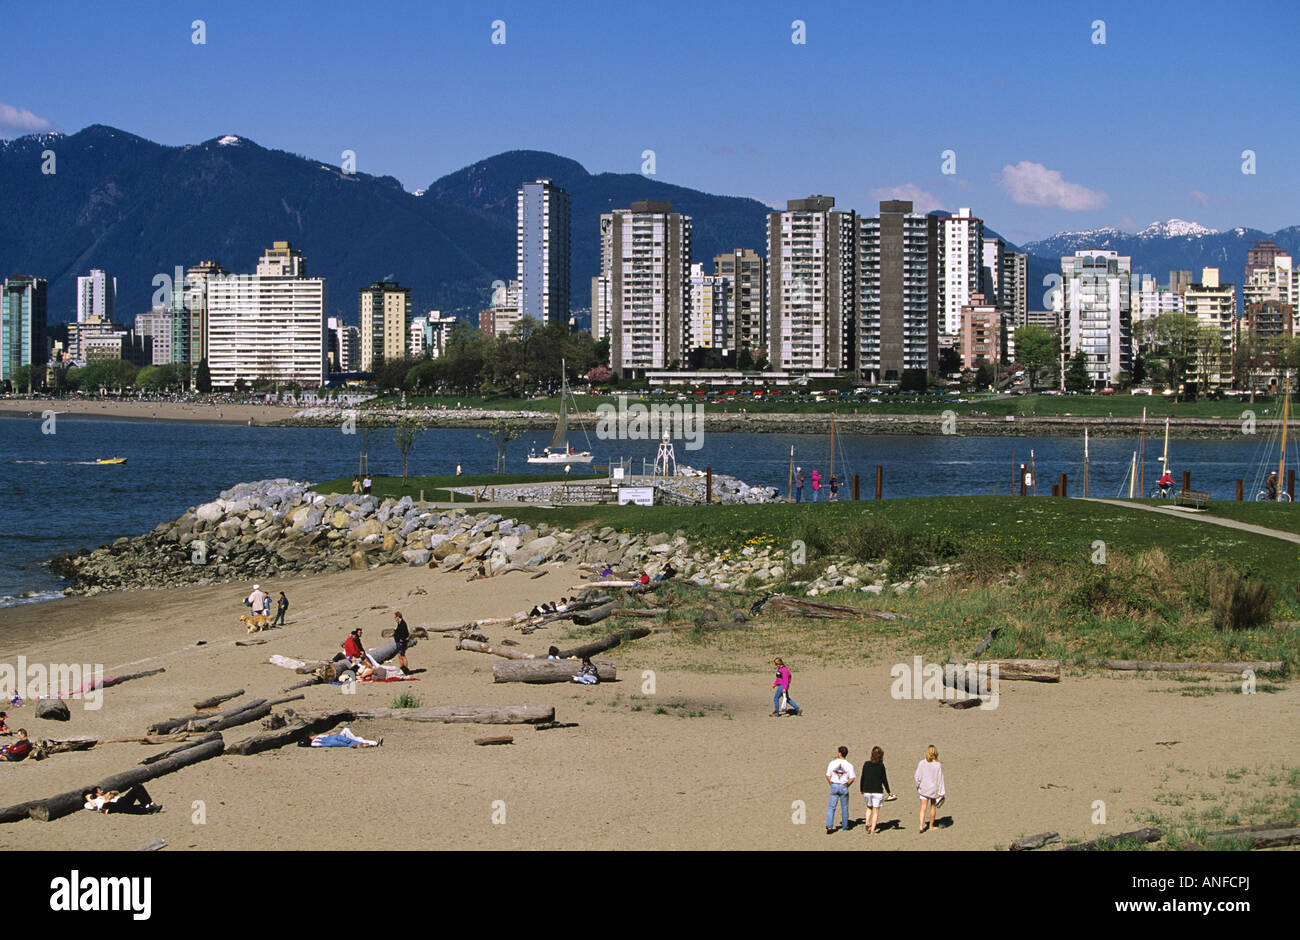 kitsalano beach across from the westend of Vancouver, British Columbia, Canada Stock Photo